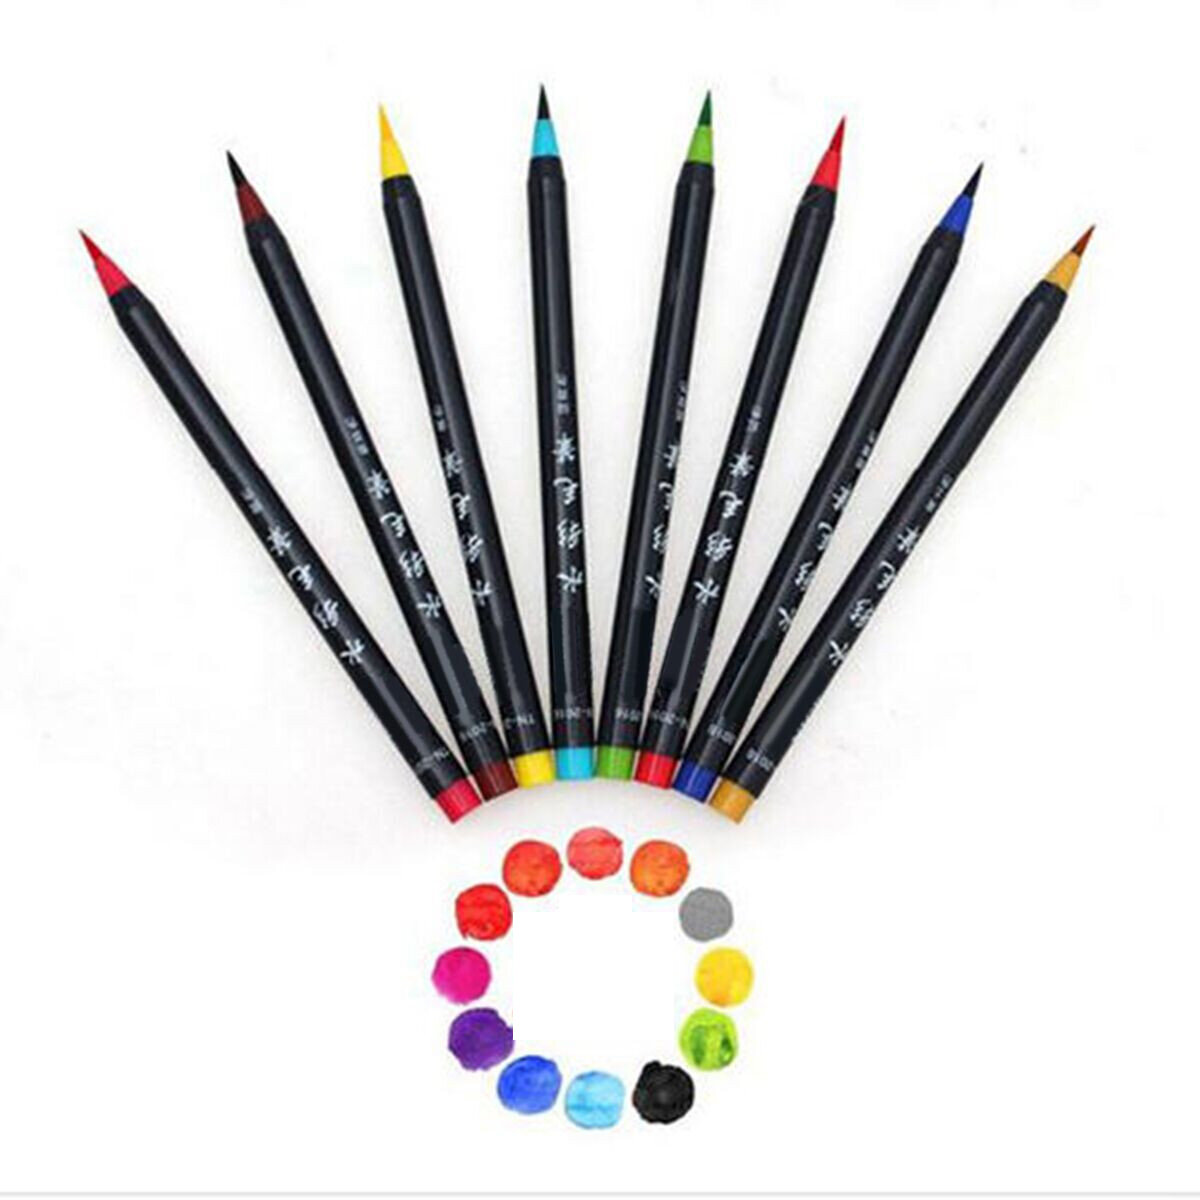 

20 Colors Marker Pen Set Watercolor Drawing Painting Brush Artist Sketch Manga Marker Pen Colored Art for Student School